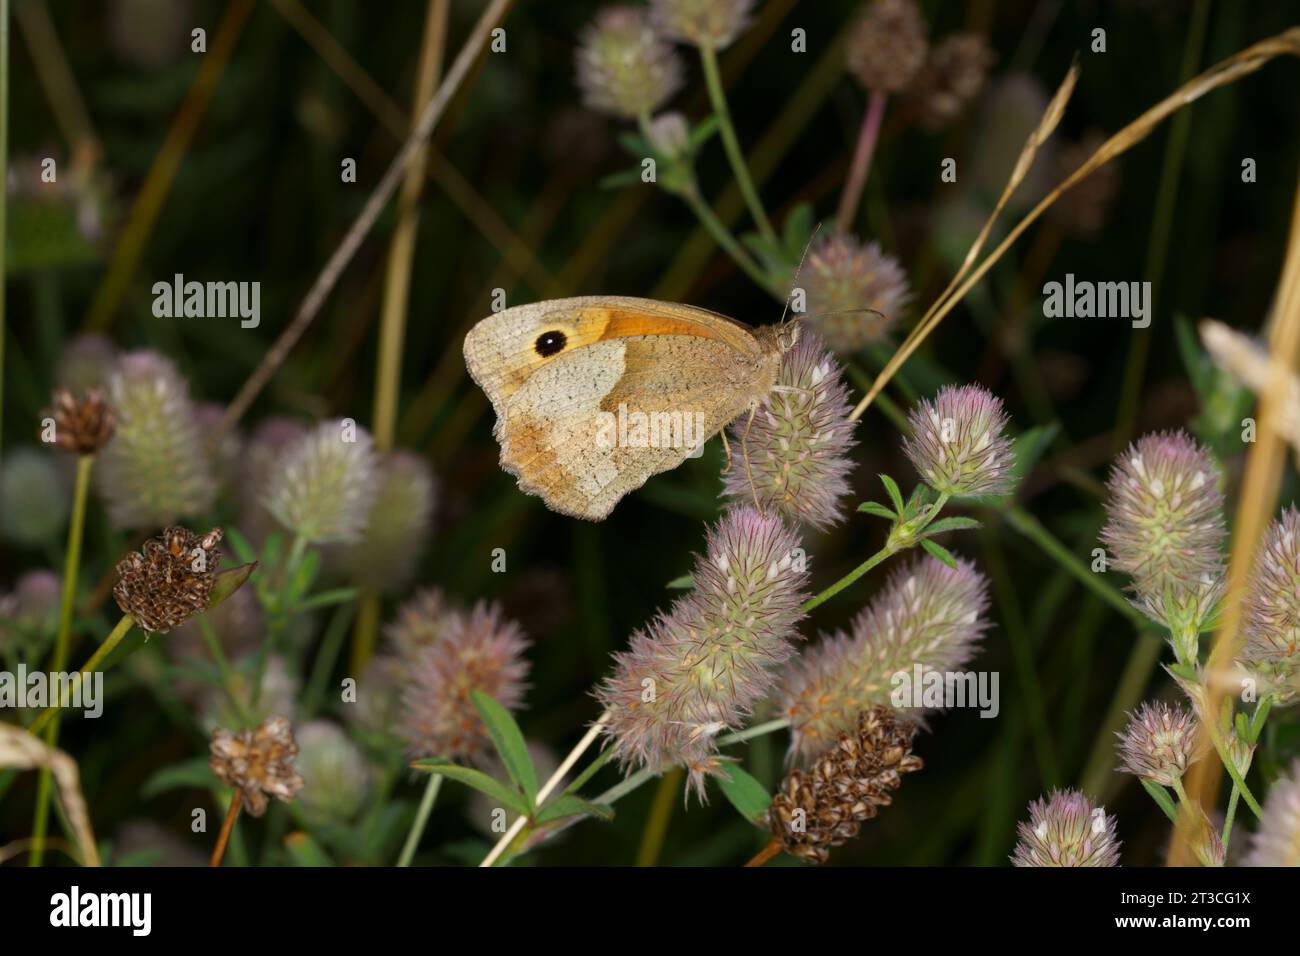 Jautakis satyras Maniola jurtina Family Nymphalidae Genus Maniola Meadow brown butterfly wild nature insect photography, picture, wallpaper Stock Photo